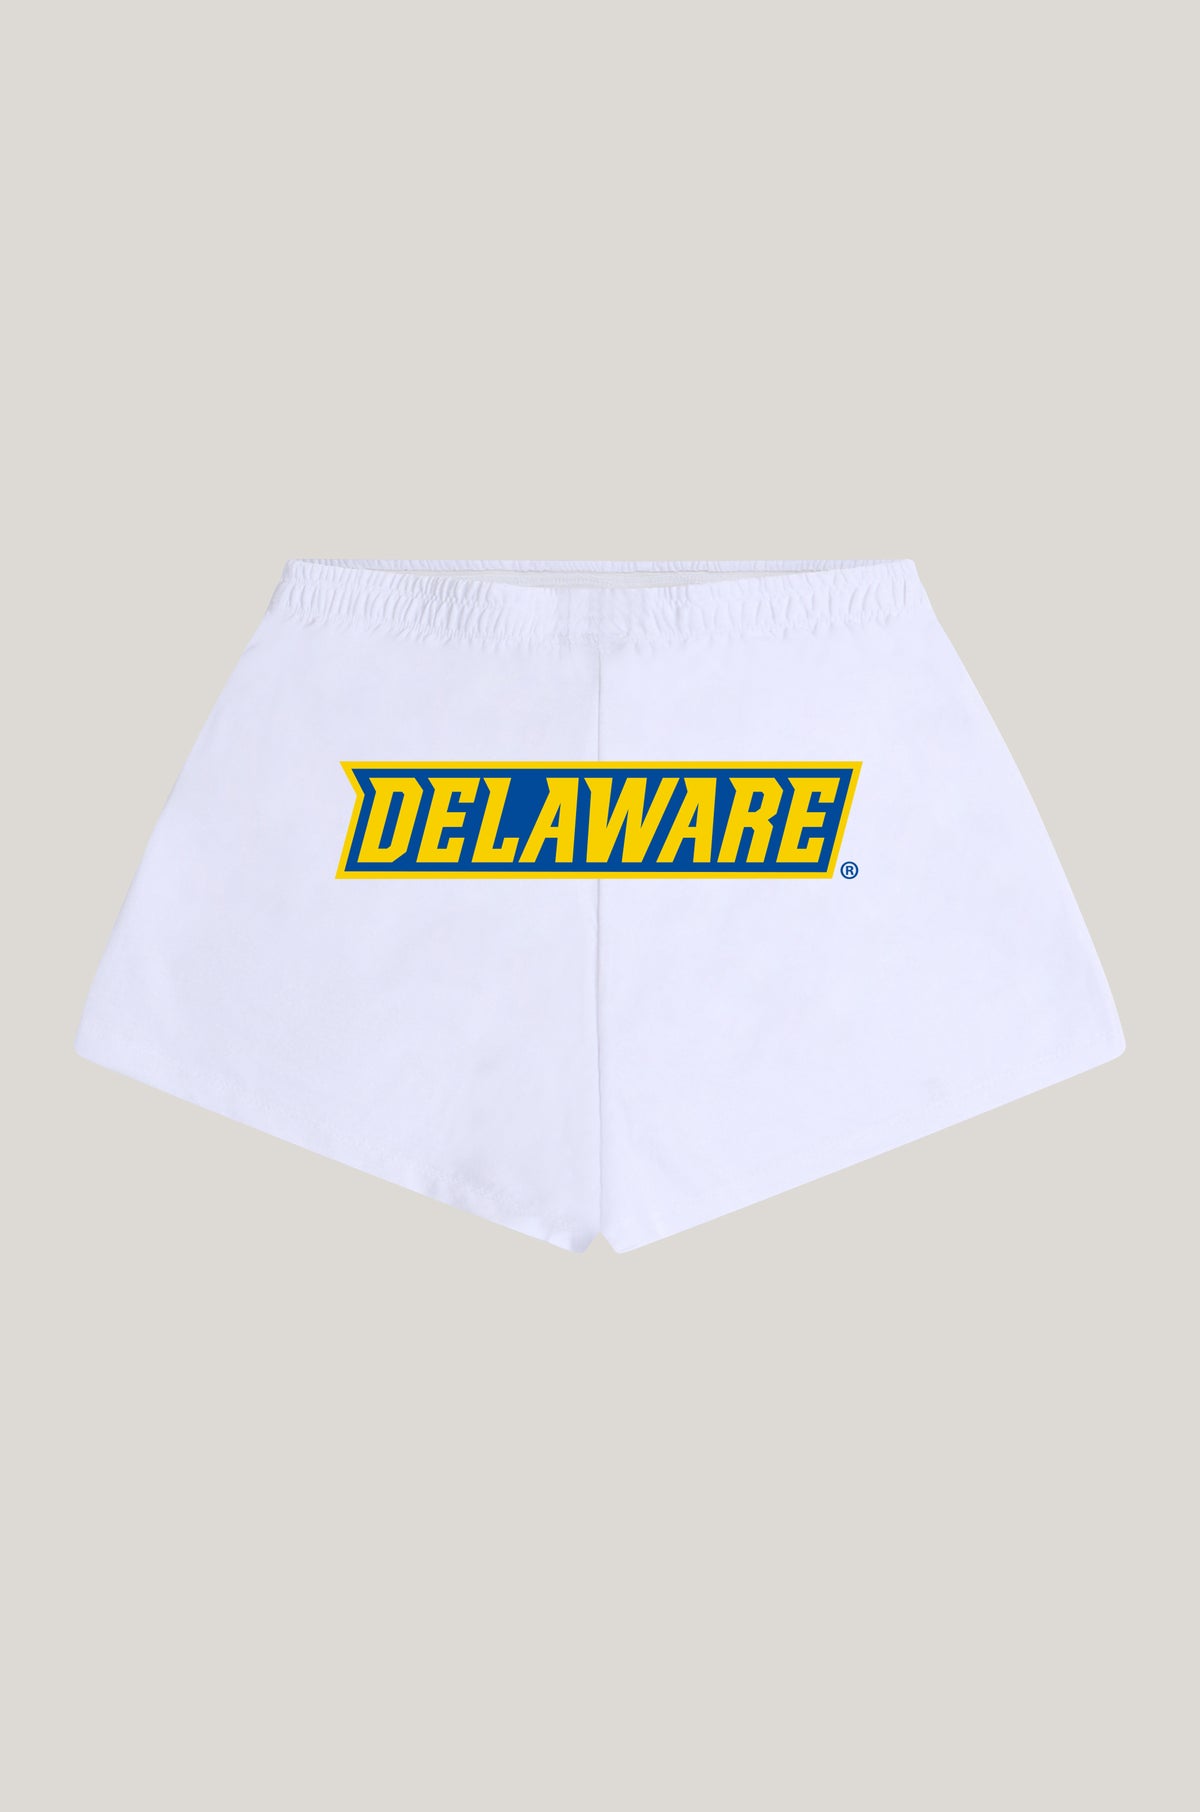 Delaware Soffee Shorts